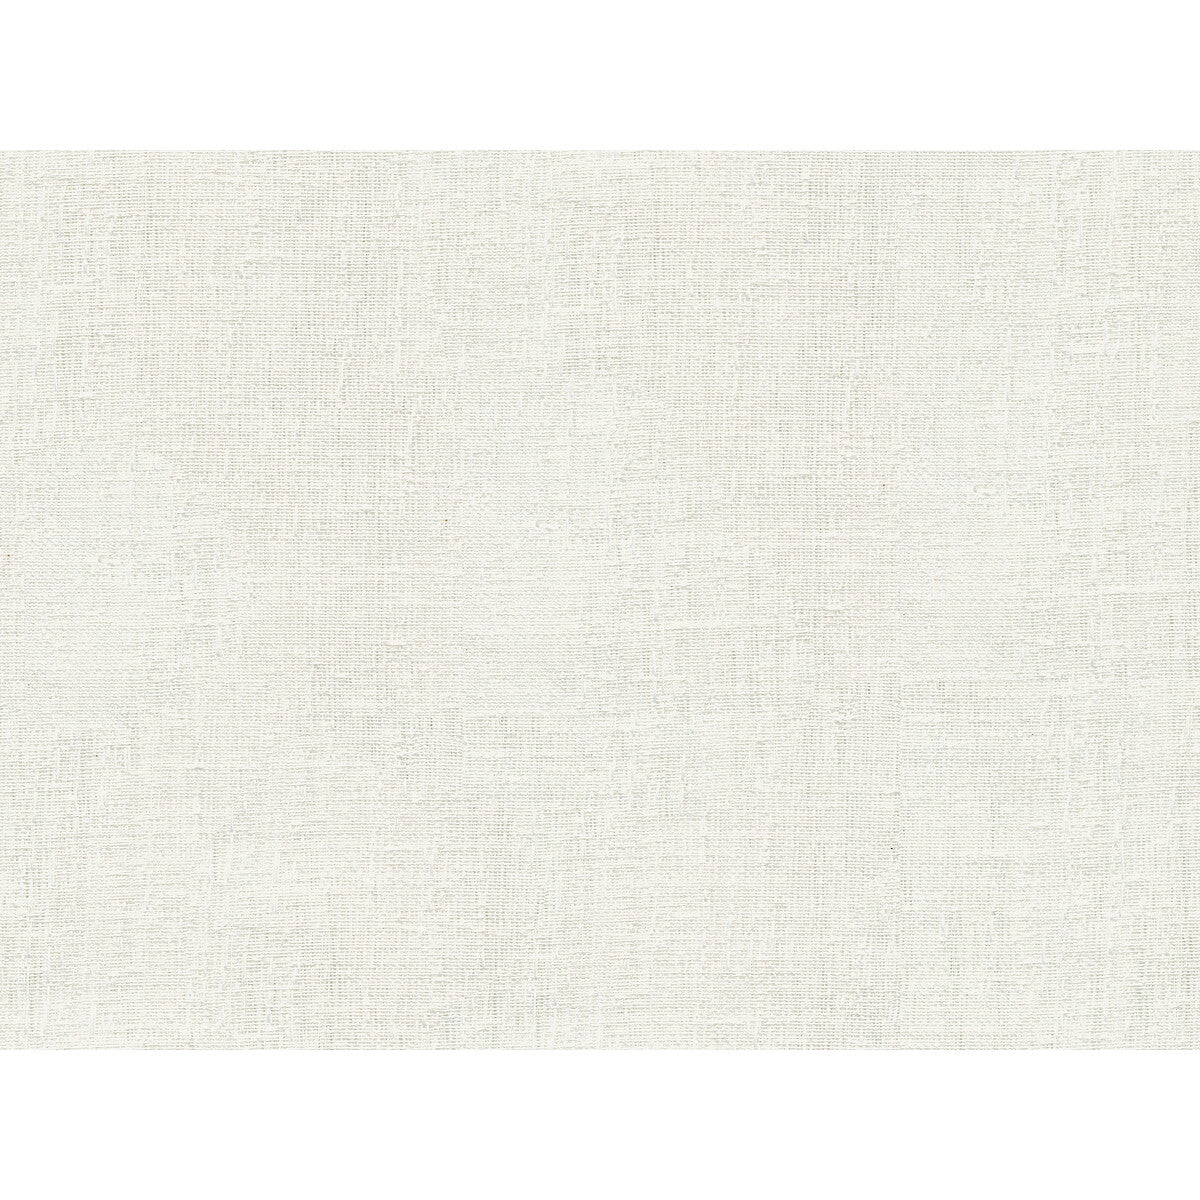 Kravet Contract fabric in 4537-101 color - pattern 4537.101.0 - by Kravet Contract